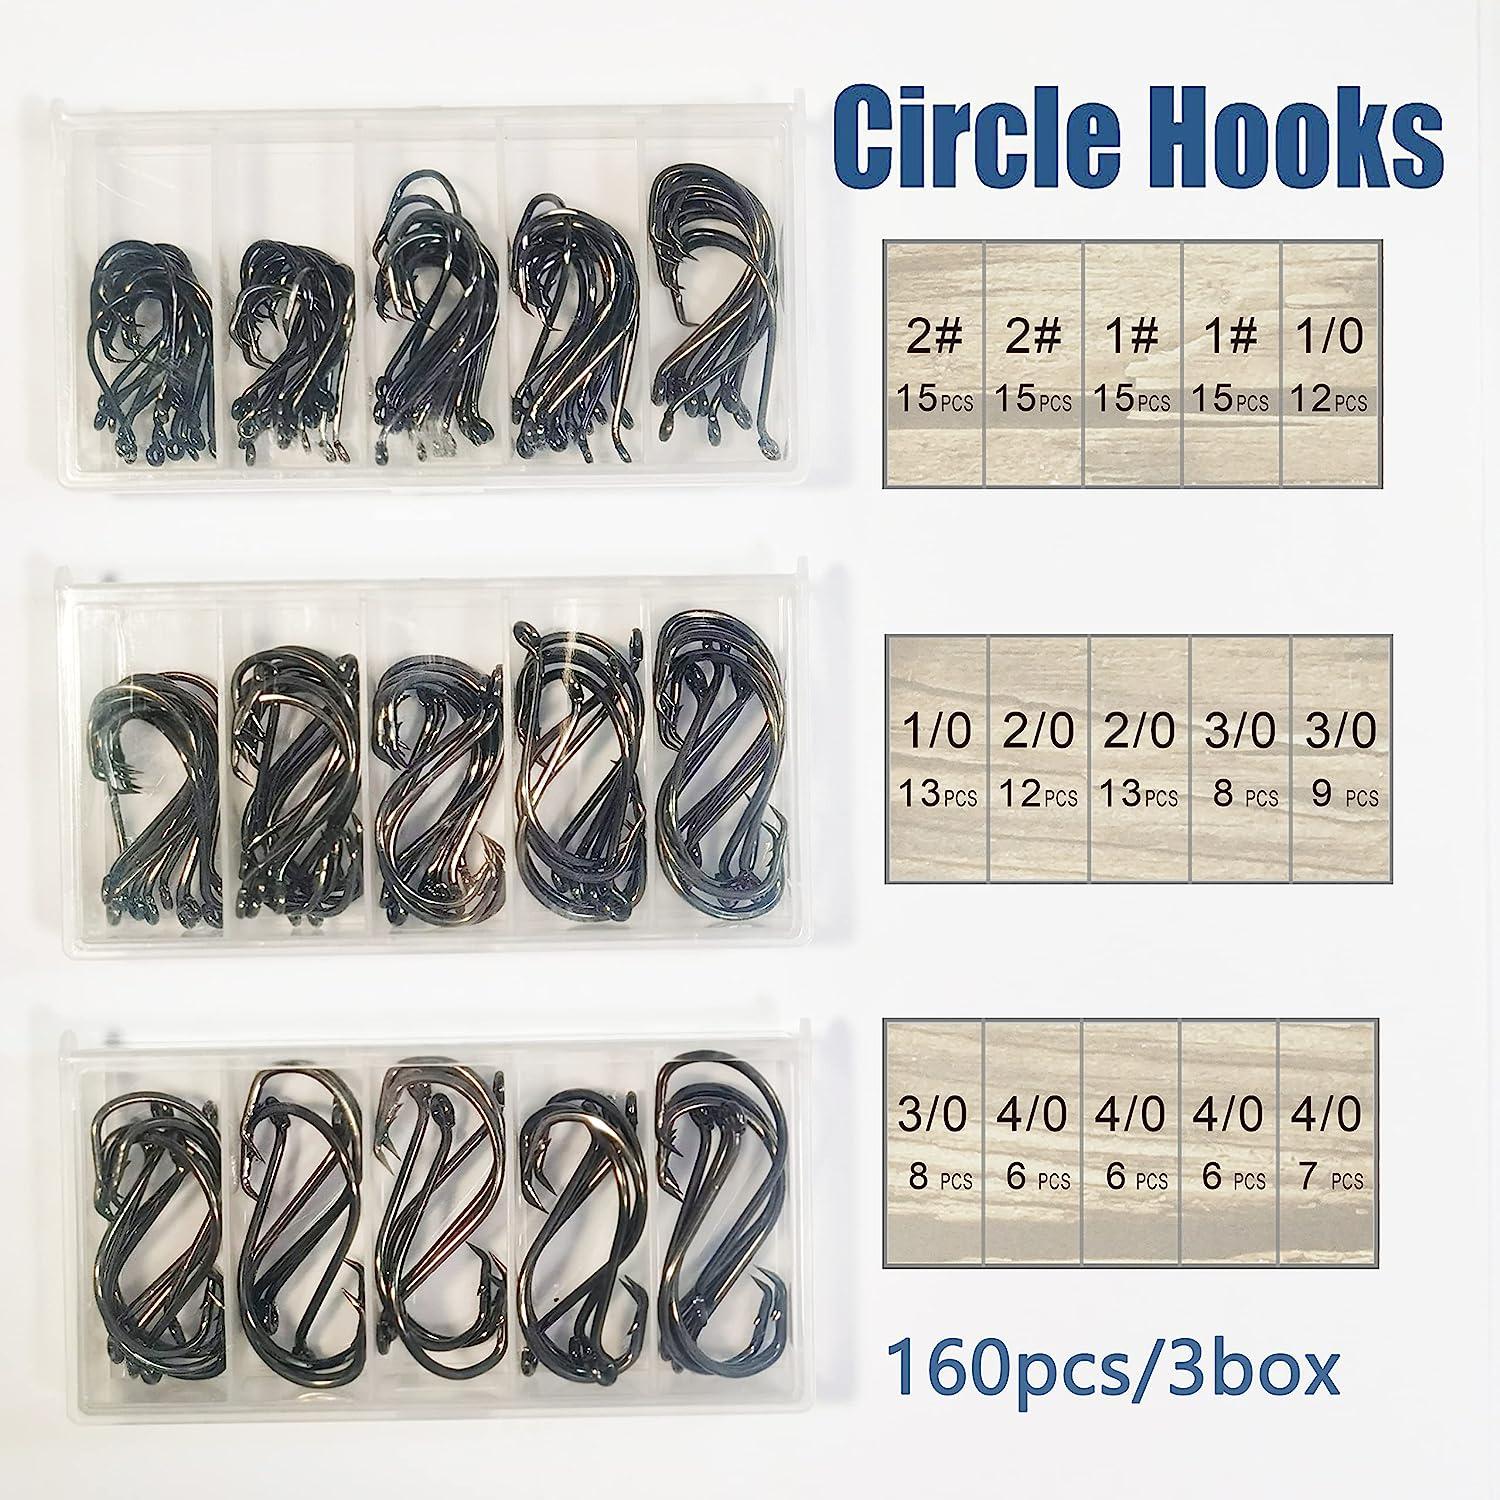 Valley Direct 160pcs Circle Hooks Saltwater Fishing Hooks kit with 3 Small  Plastic Boxes, 6 Fish-Hook Sizes 4/0 3/0 2/0 1/0 1 2 Catfish-Hooks  Octopus-Hook Circle Hooks for Catfish Bass and Trout Hook, Hooks -   Canada